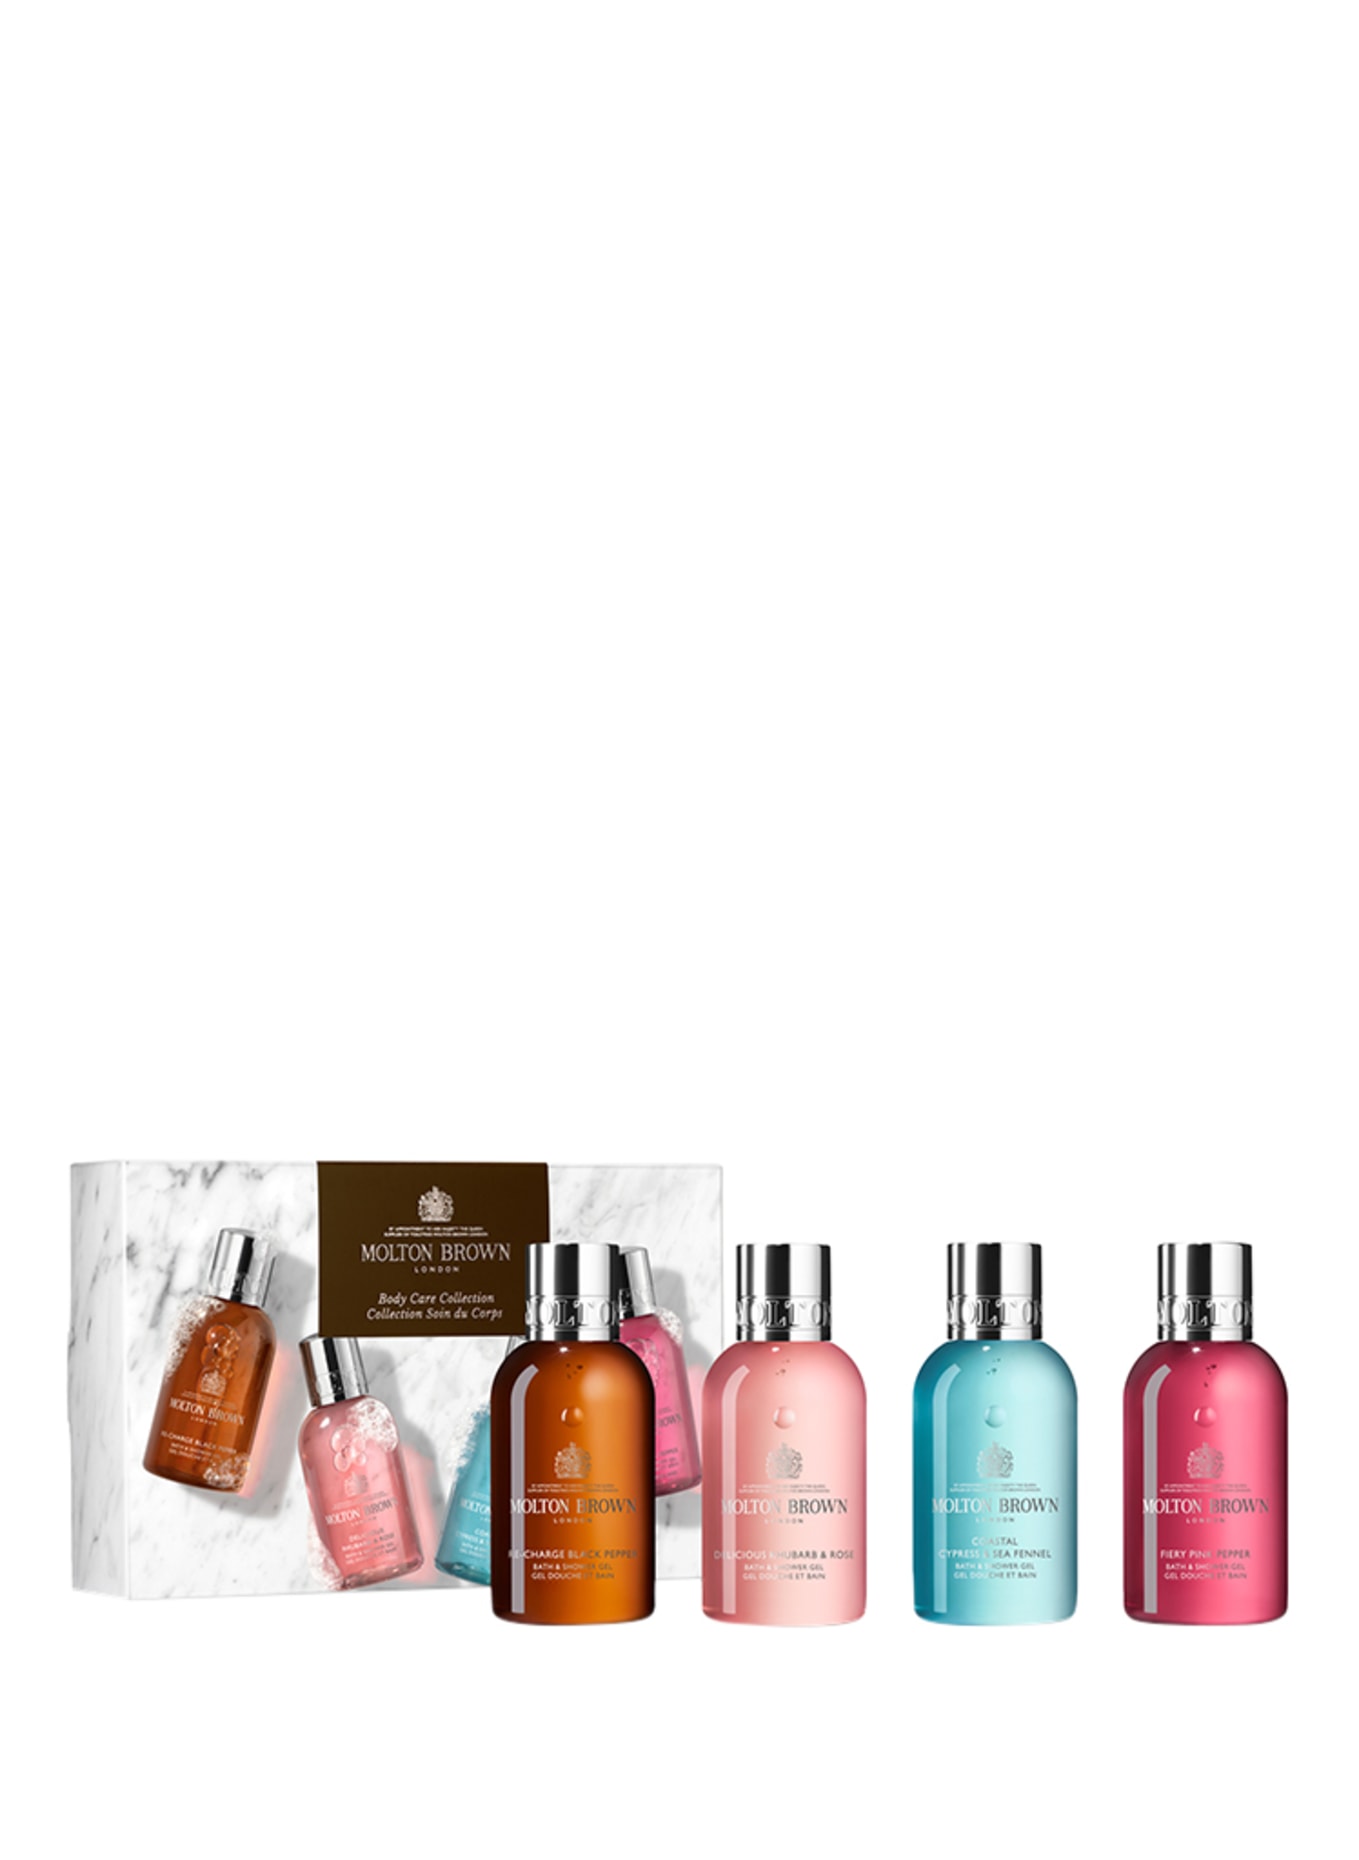 MOLTON BROWN WOODY & FLORAL BODY CARE COLLECTION (Obrazek 1)